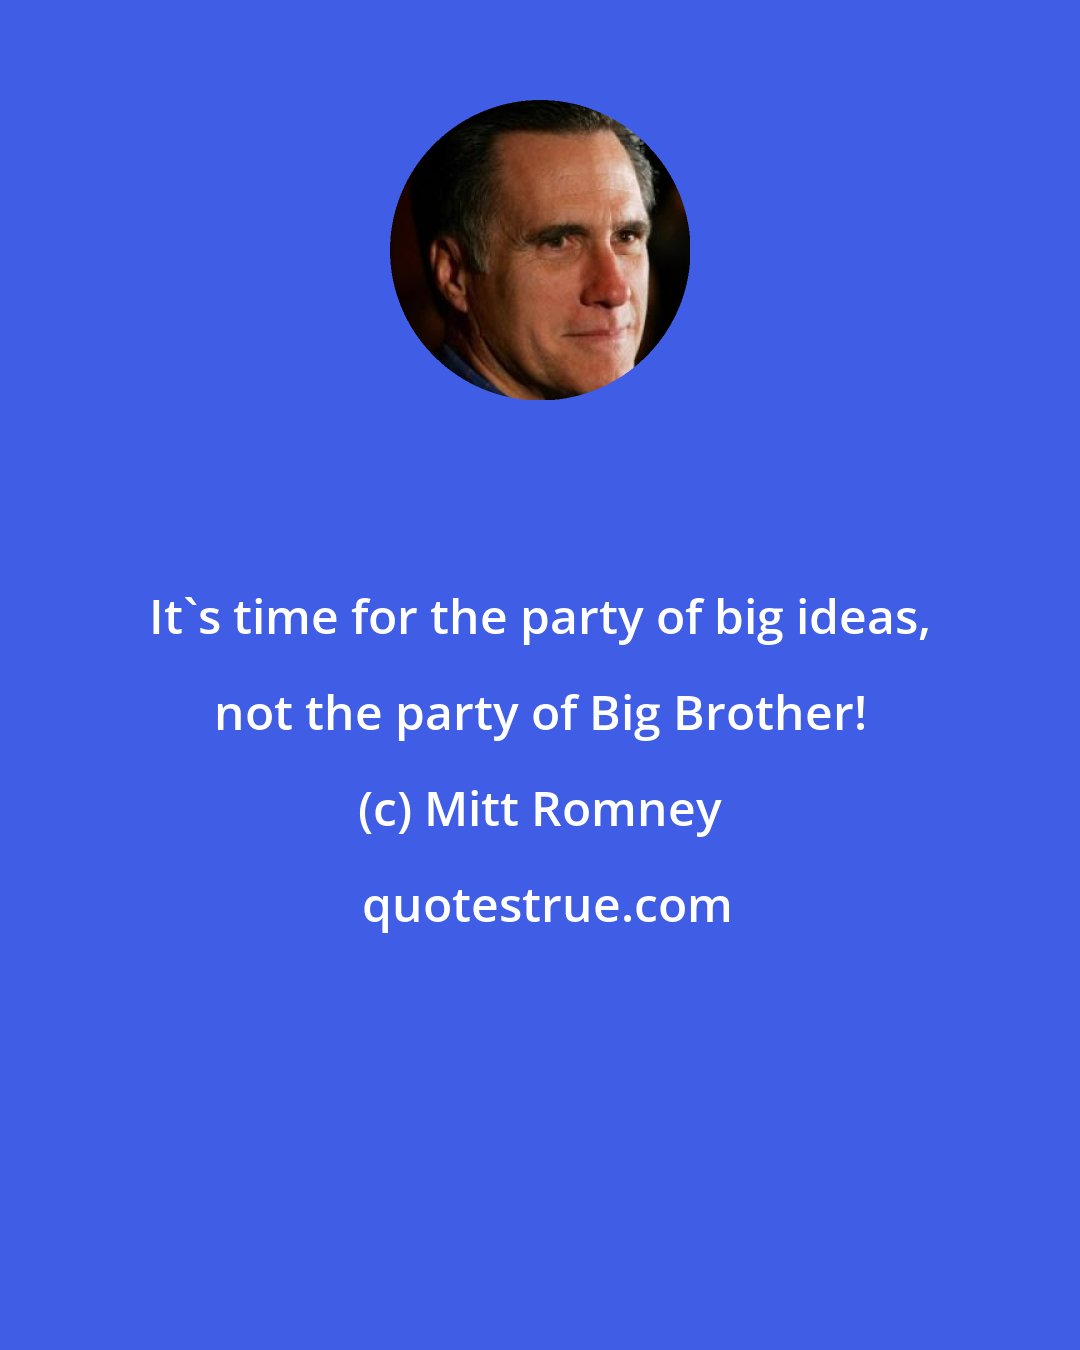 Mitt Romney: It's time for the party of big ideas, not the party of Big Brother!